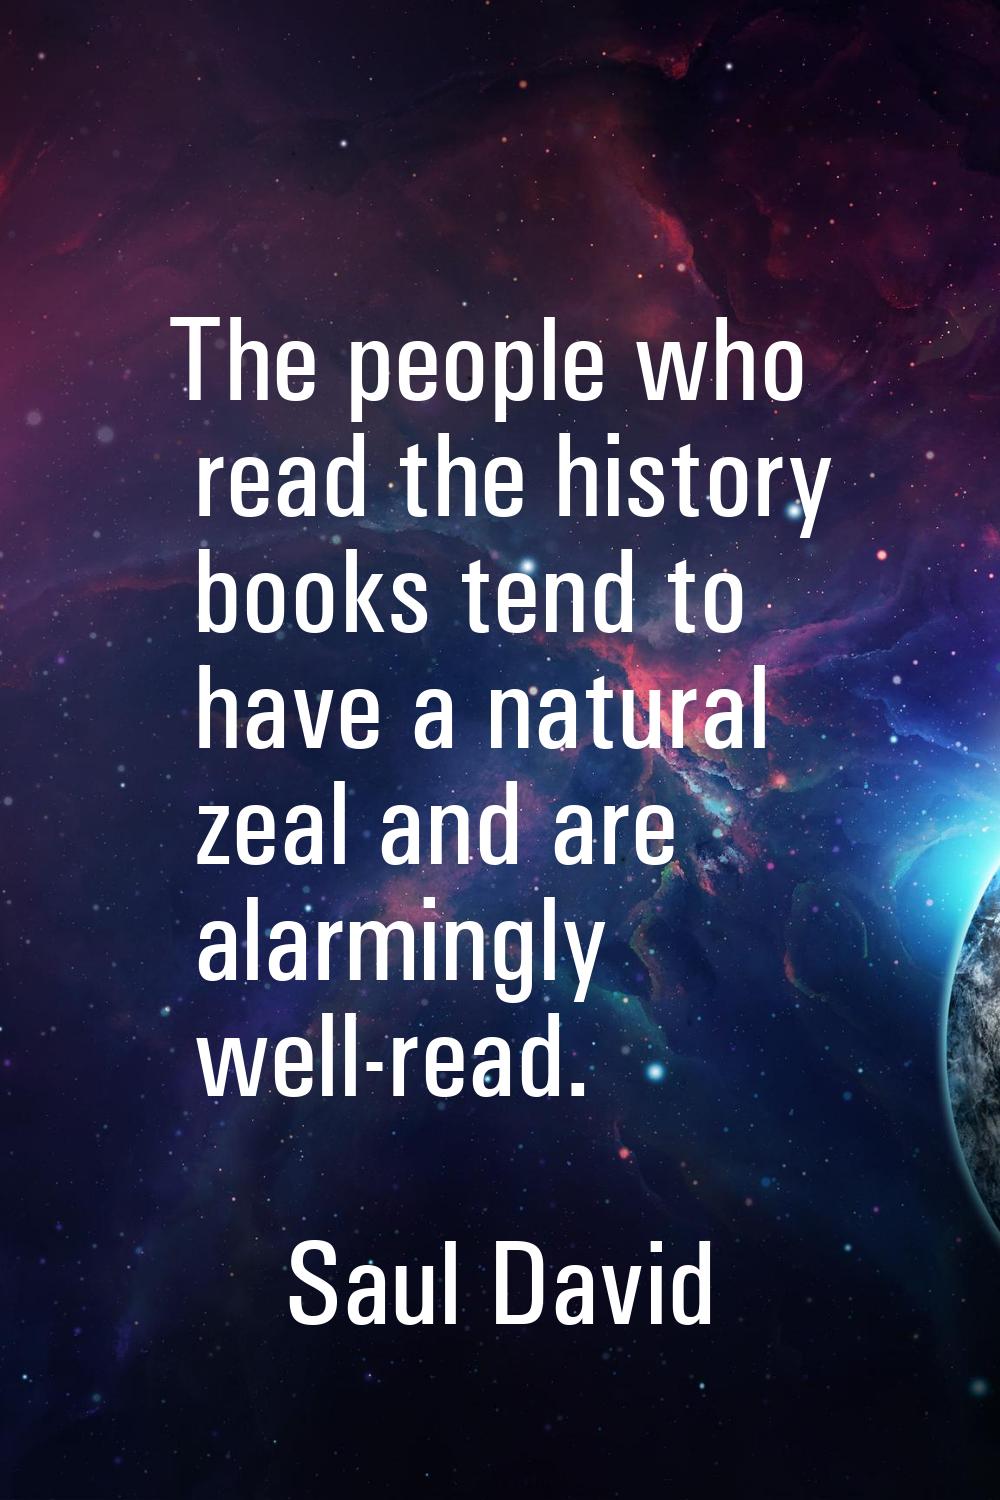 The people who read the history books tend to have a natural zeal and are alarmingly well-read.